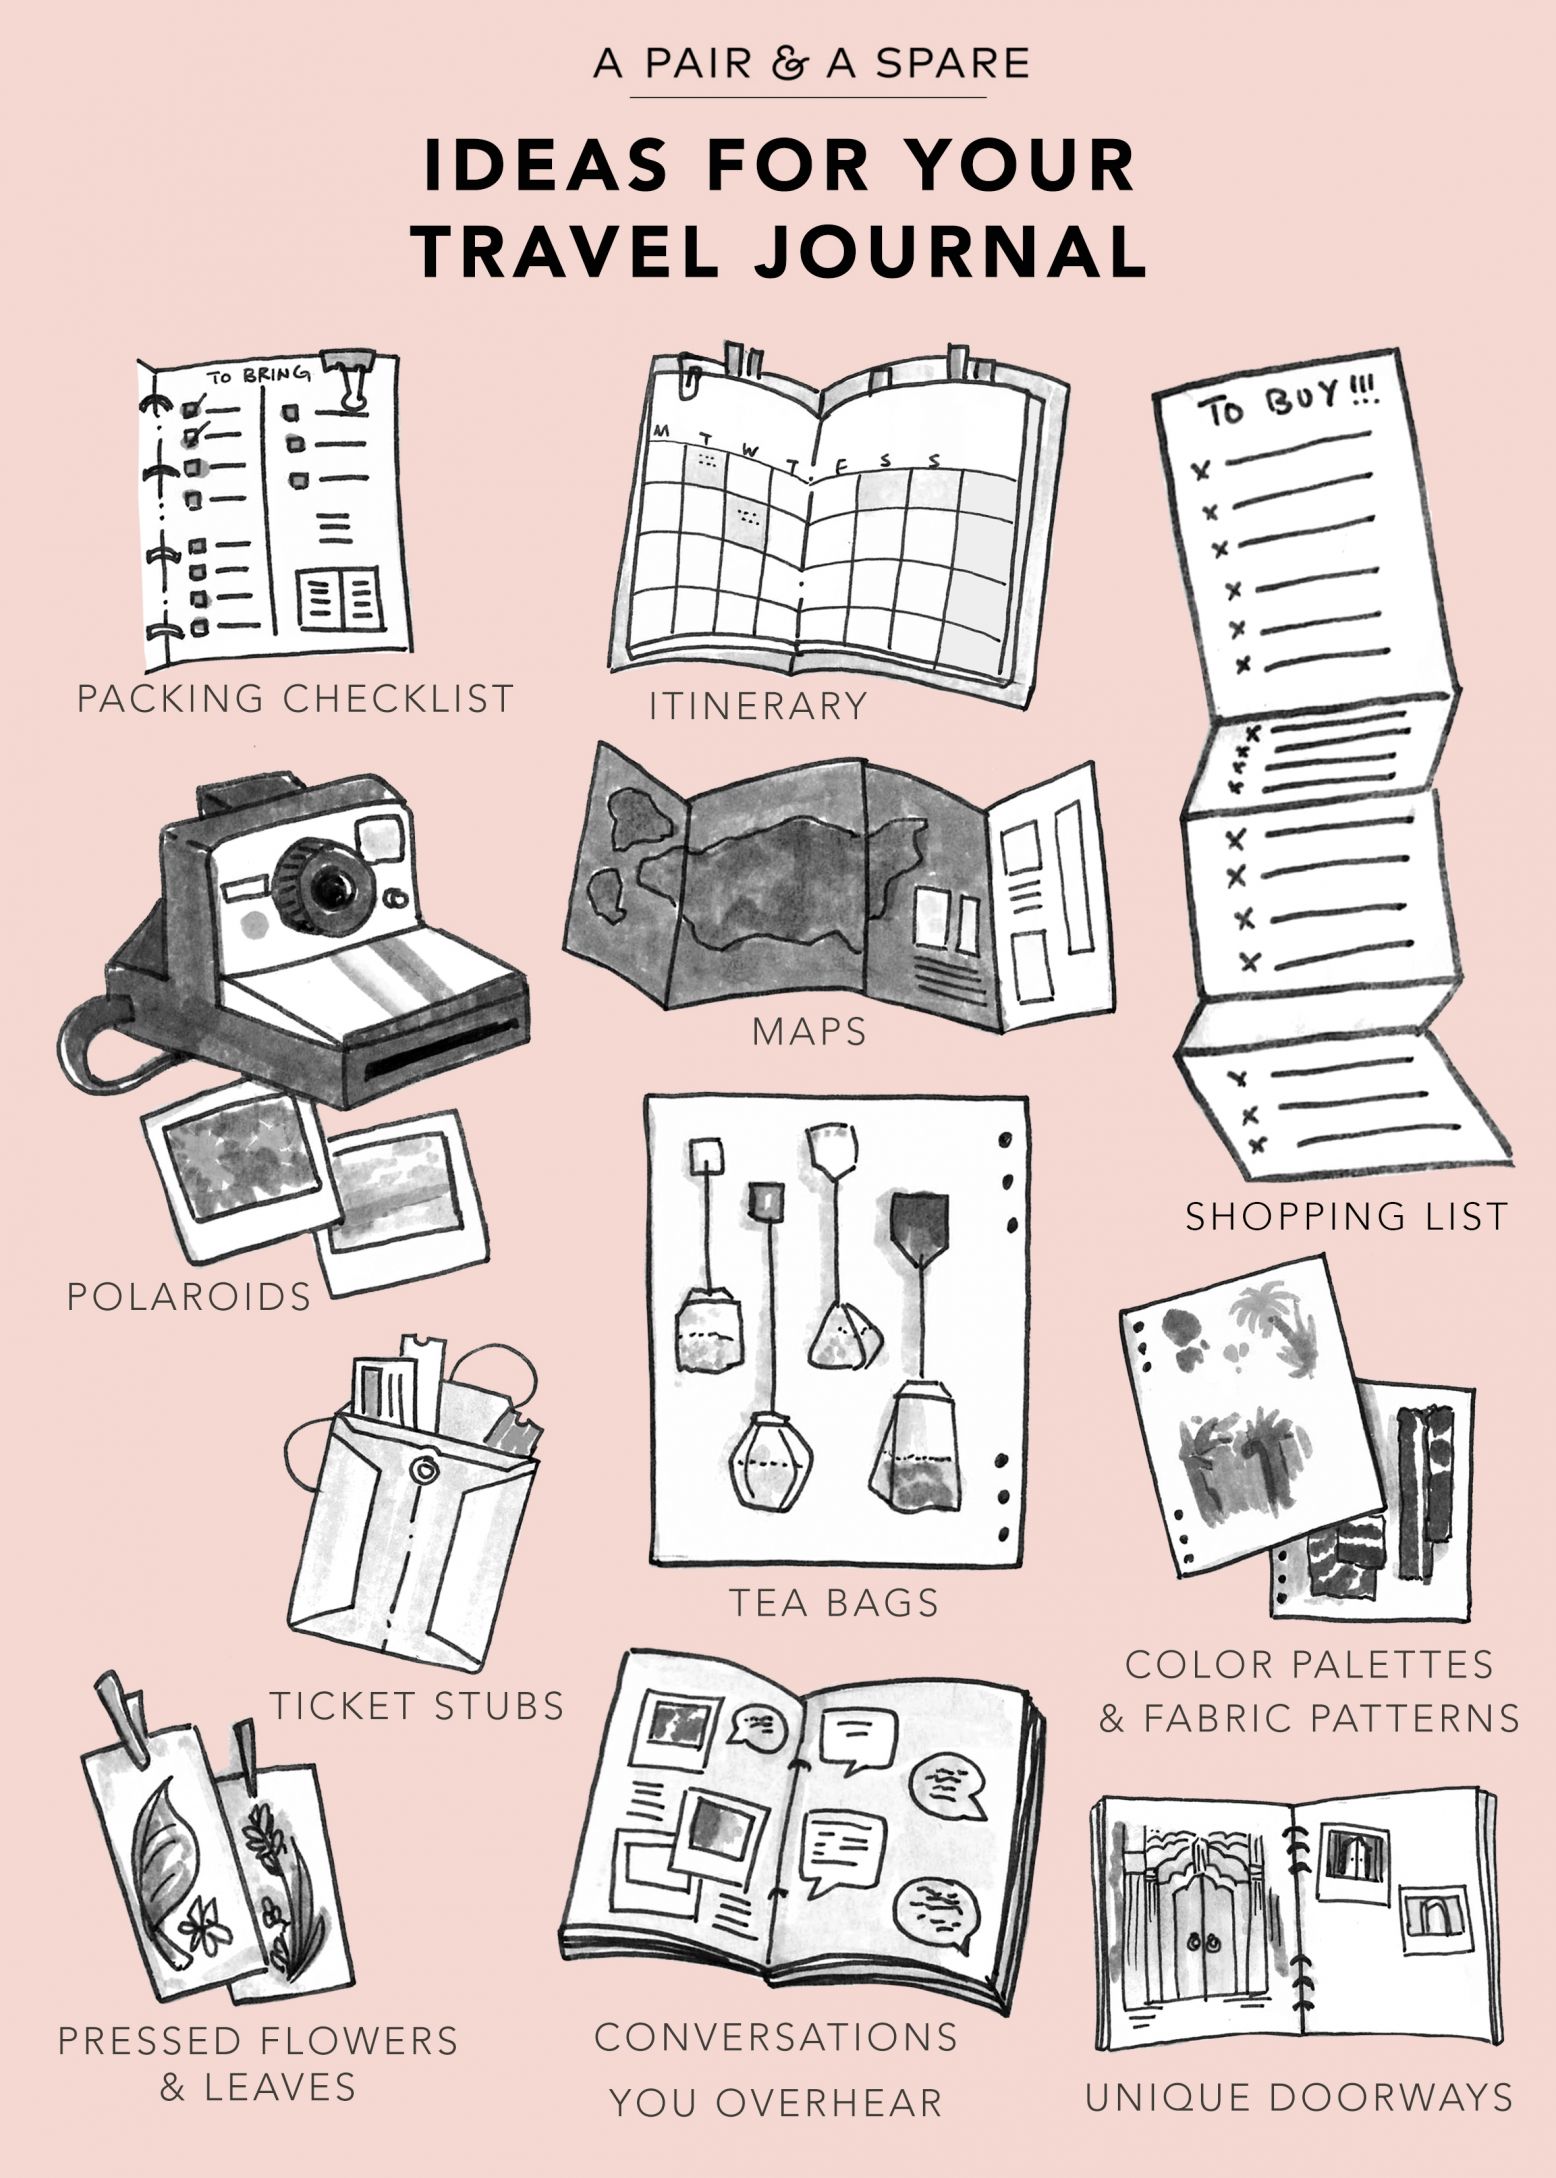 How to Keep a Travel Journal with Your Partner